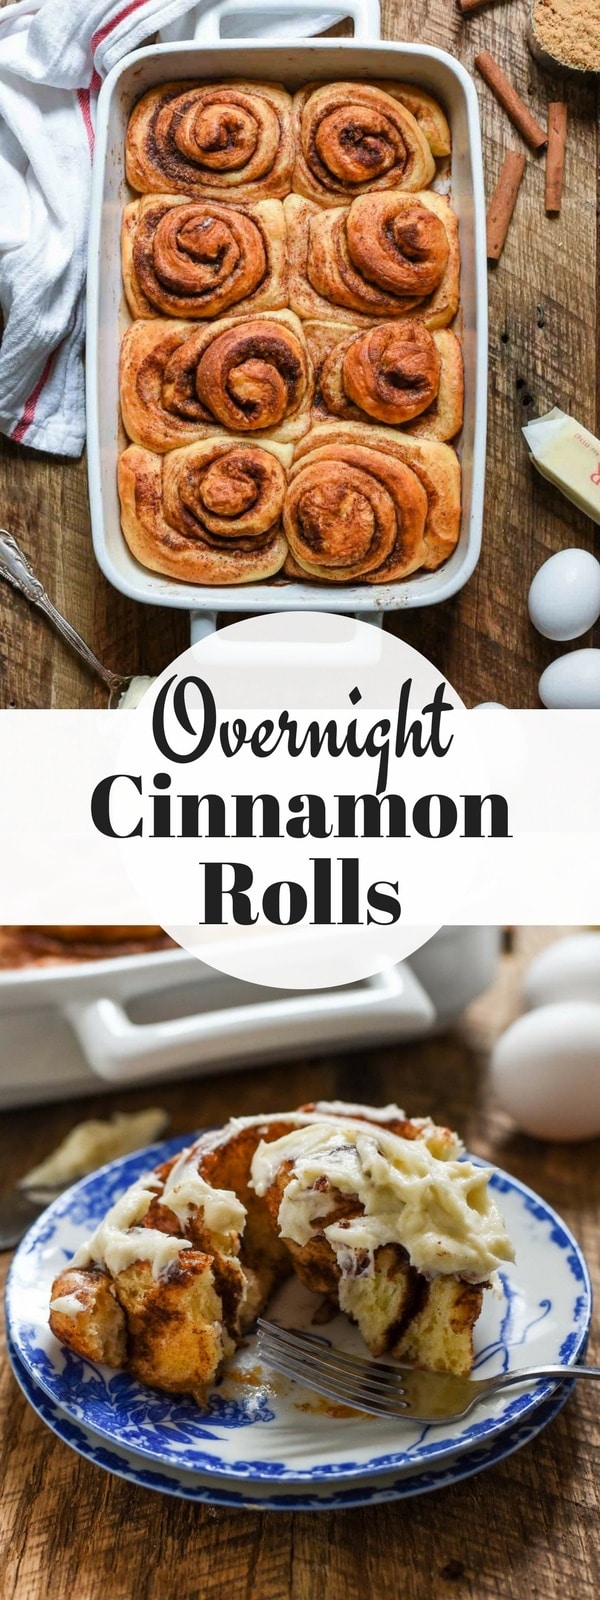 These Overnight Cinnamon Rolls are fluffy and chewy and smothered in cream cheese frosting. This is the perfect breakfast recipe for the holidays!